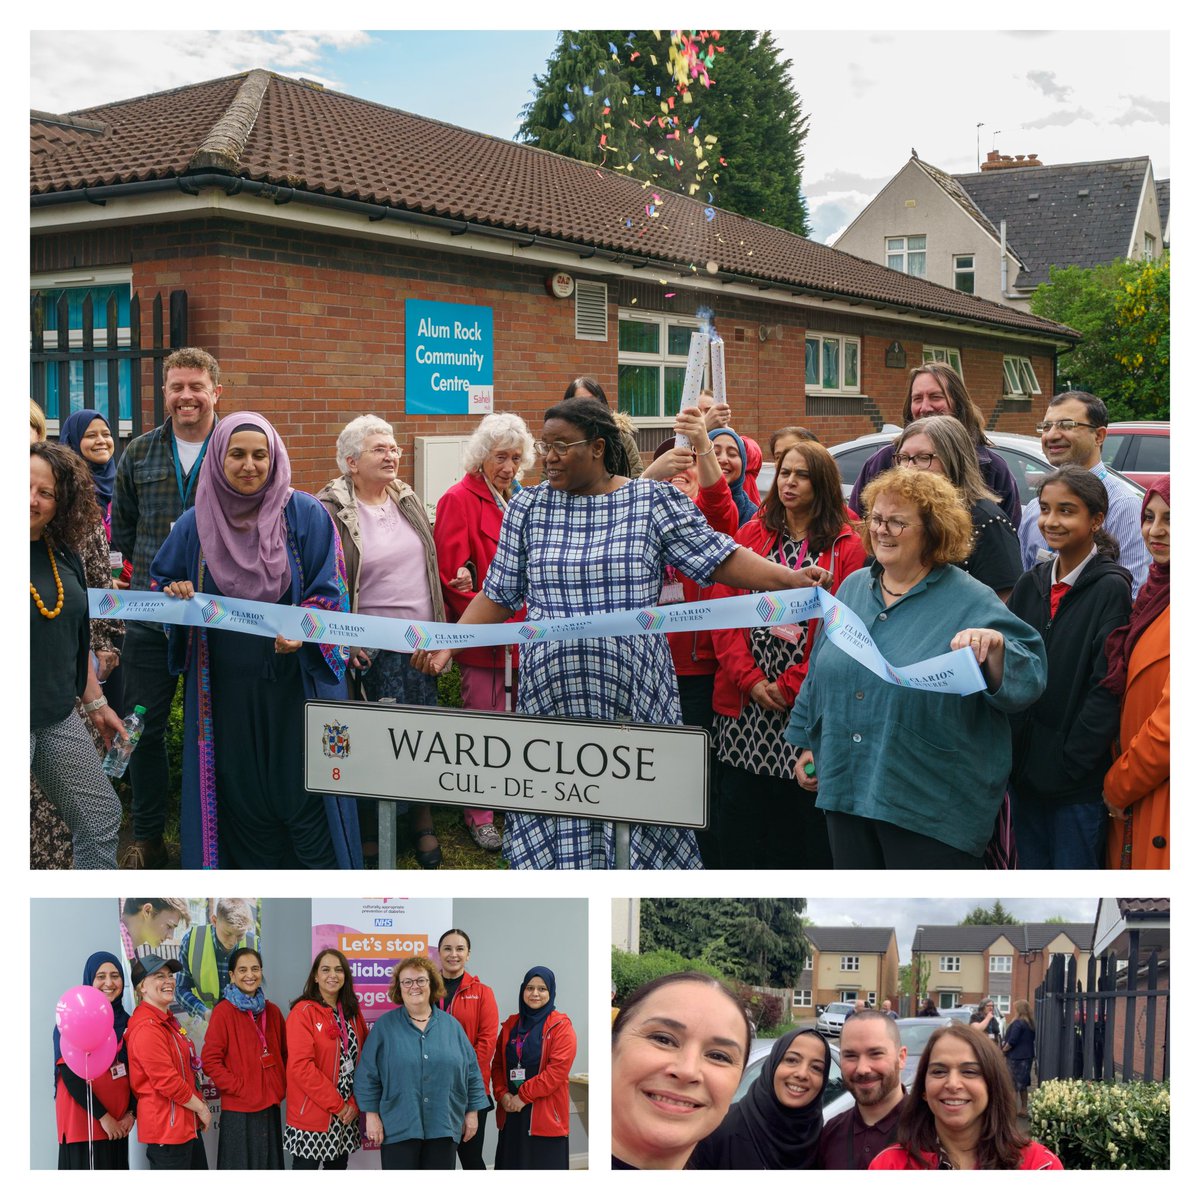 Woop! It's official - Saheli Hub opens its second site thanks to @ClarionFutures handover of Alum Rock Community Centre. Ribbon cutting by Cllrs @Ms_SThompson with @mariamkhan29 After 12 yrs we have a home to call our very own. Watch this space! #community #Health #sport